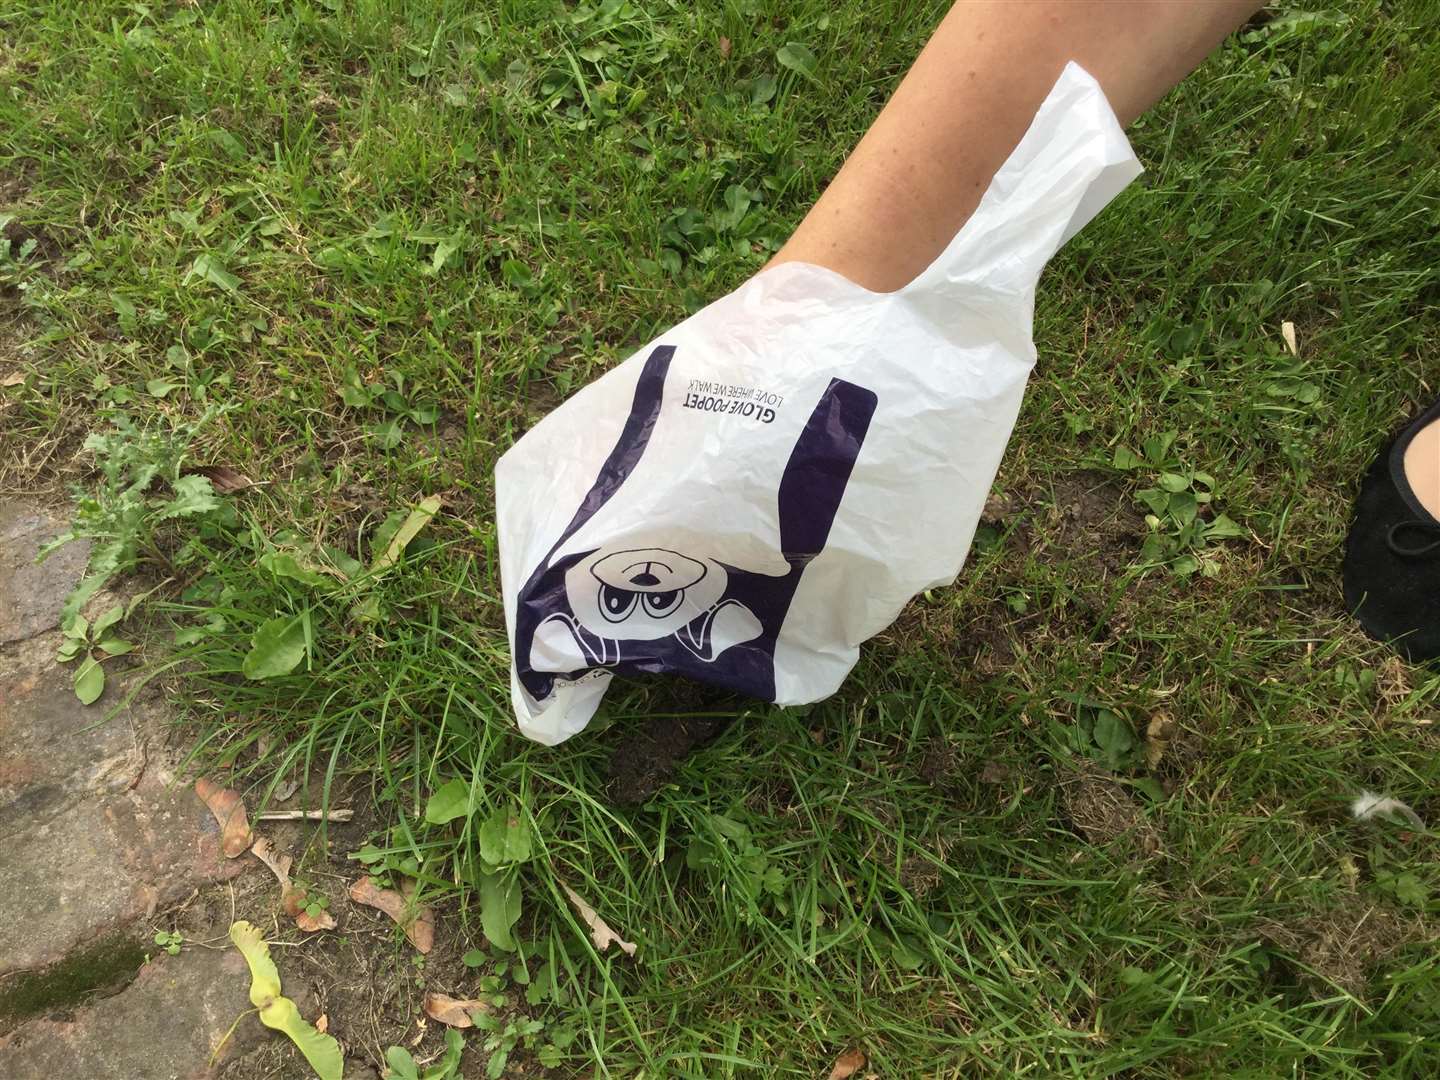 Canterbury City Council is providing free poo bags as part of the crackdown